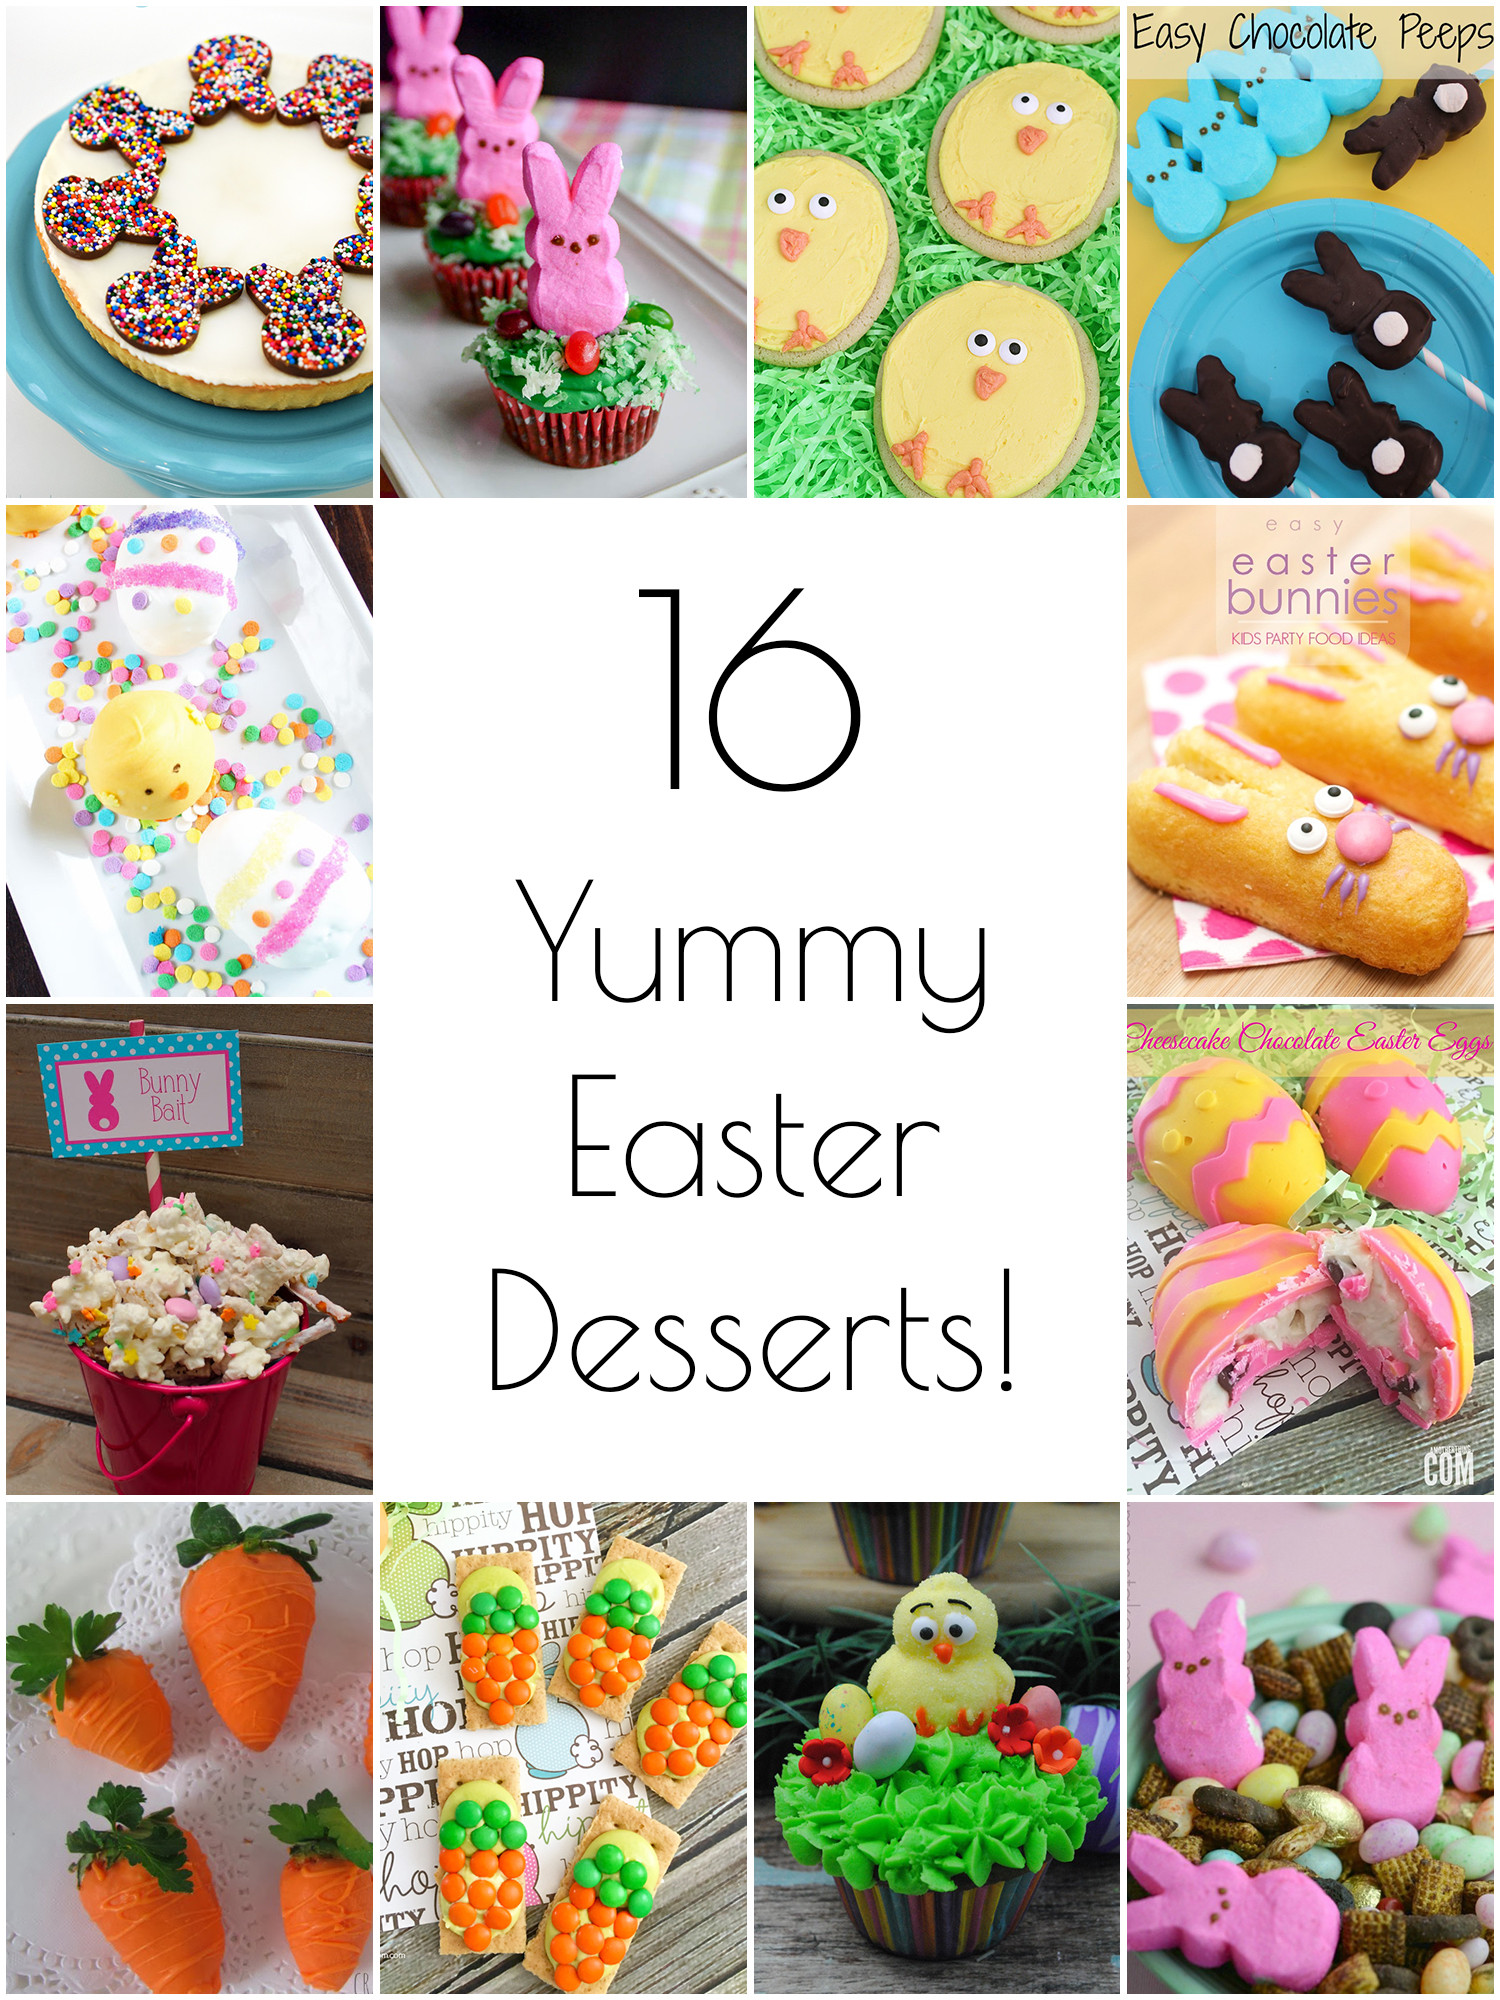 Yummy Easter Desserts
 So Creative 16 Yummy Easter Desserts